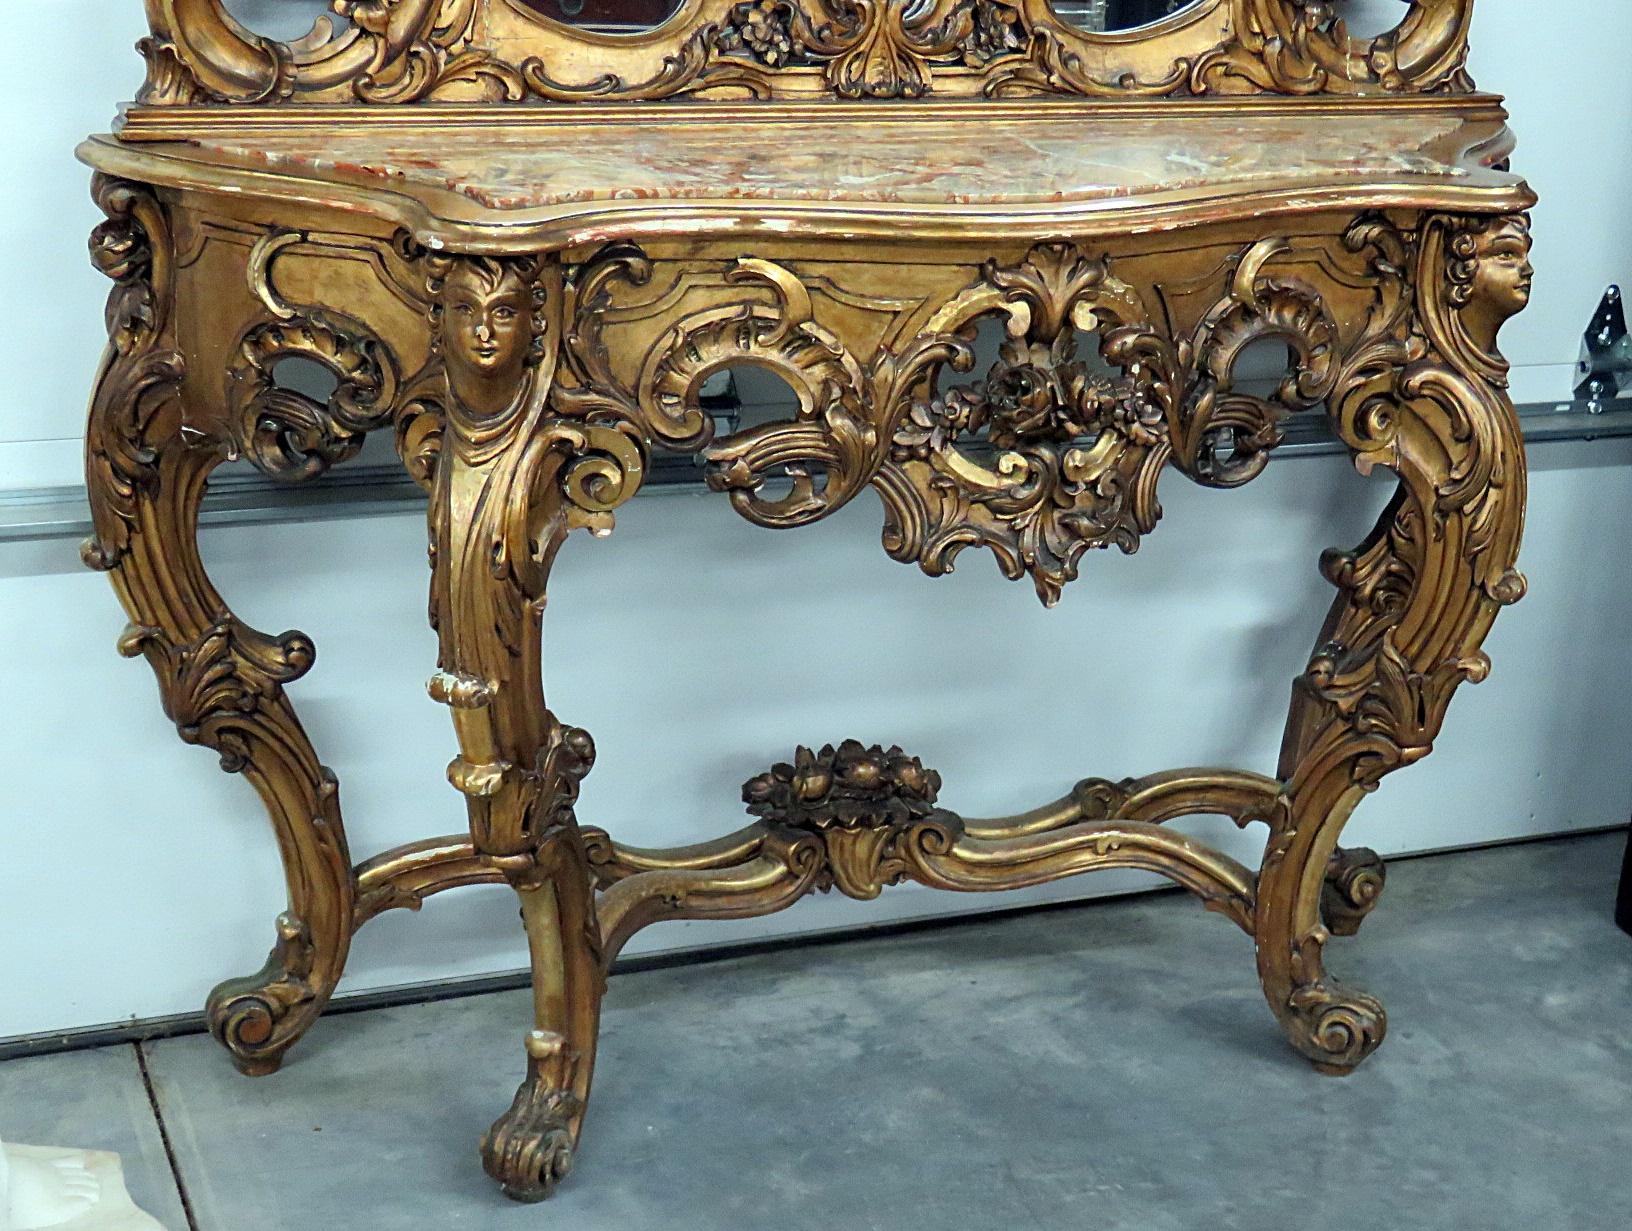 19th century carved giltwood marble top console with mirror. The console measures 36.5